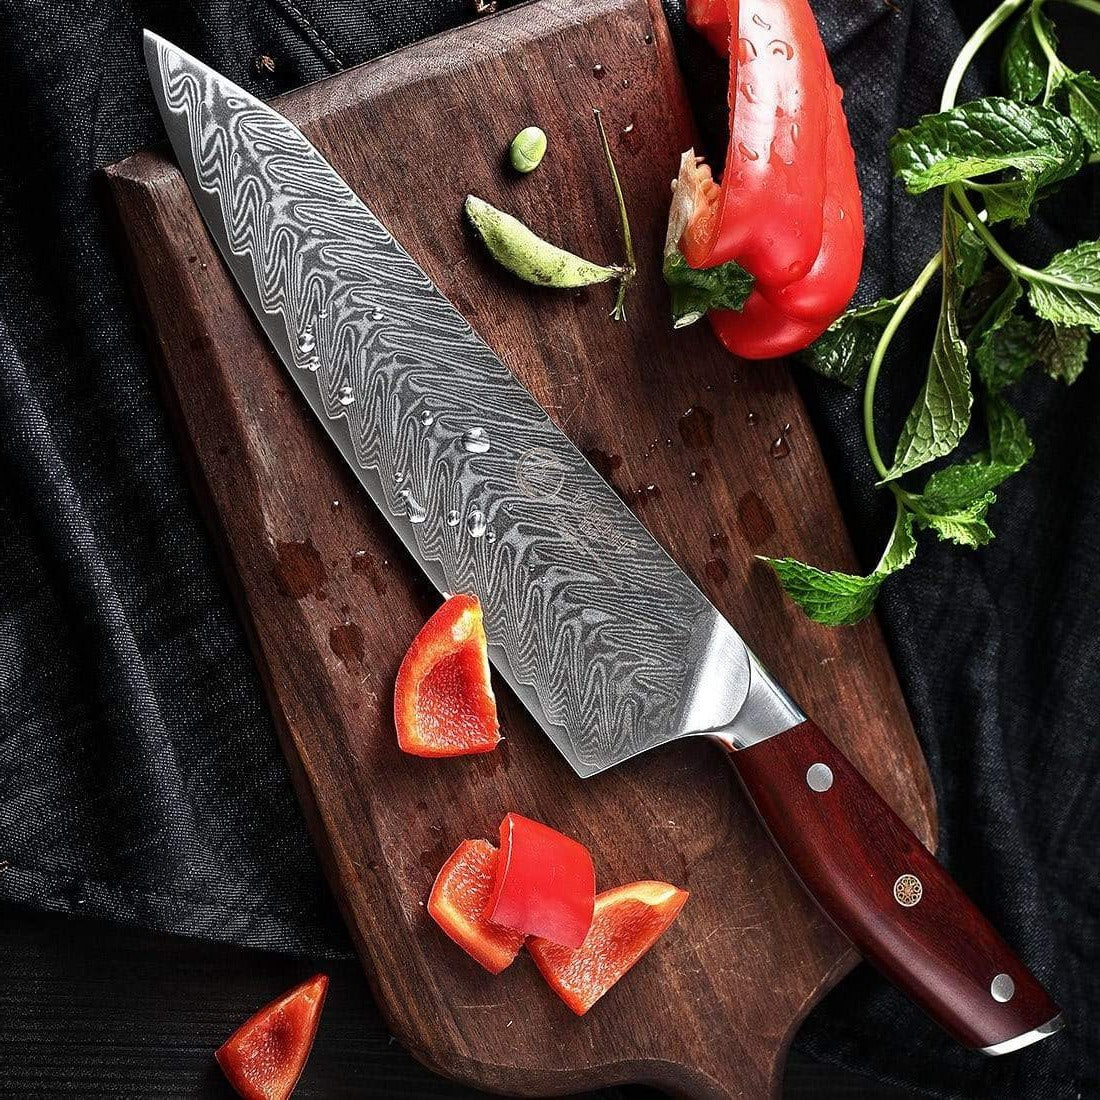 8 Inch Damascus Chef's Knife